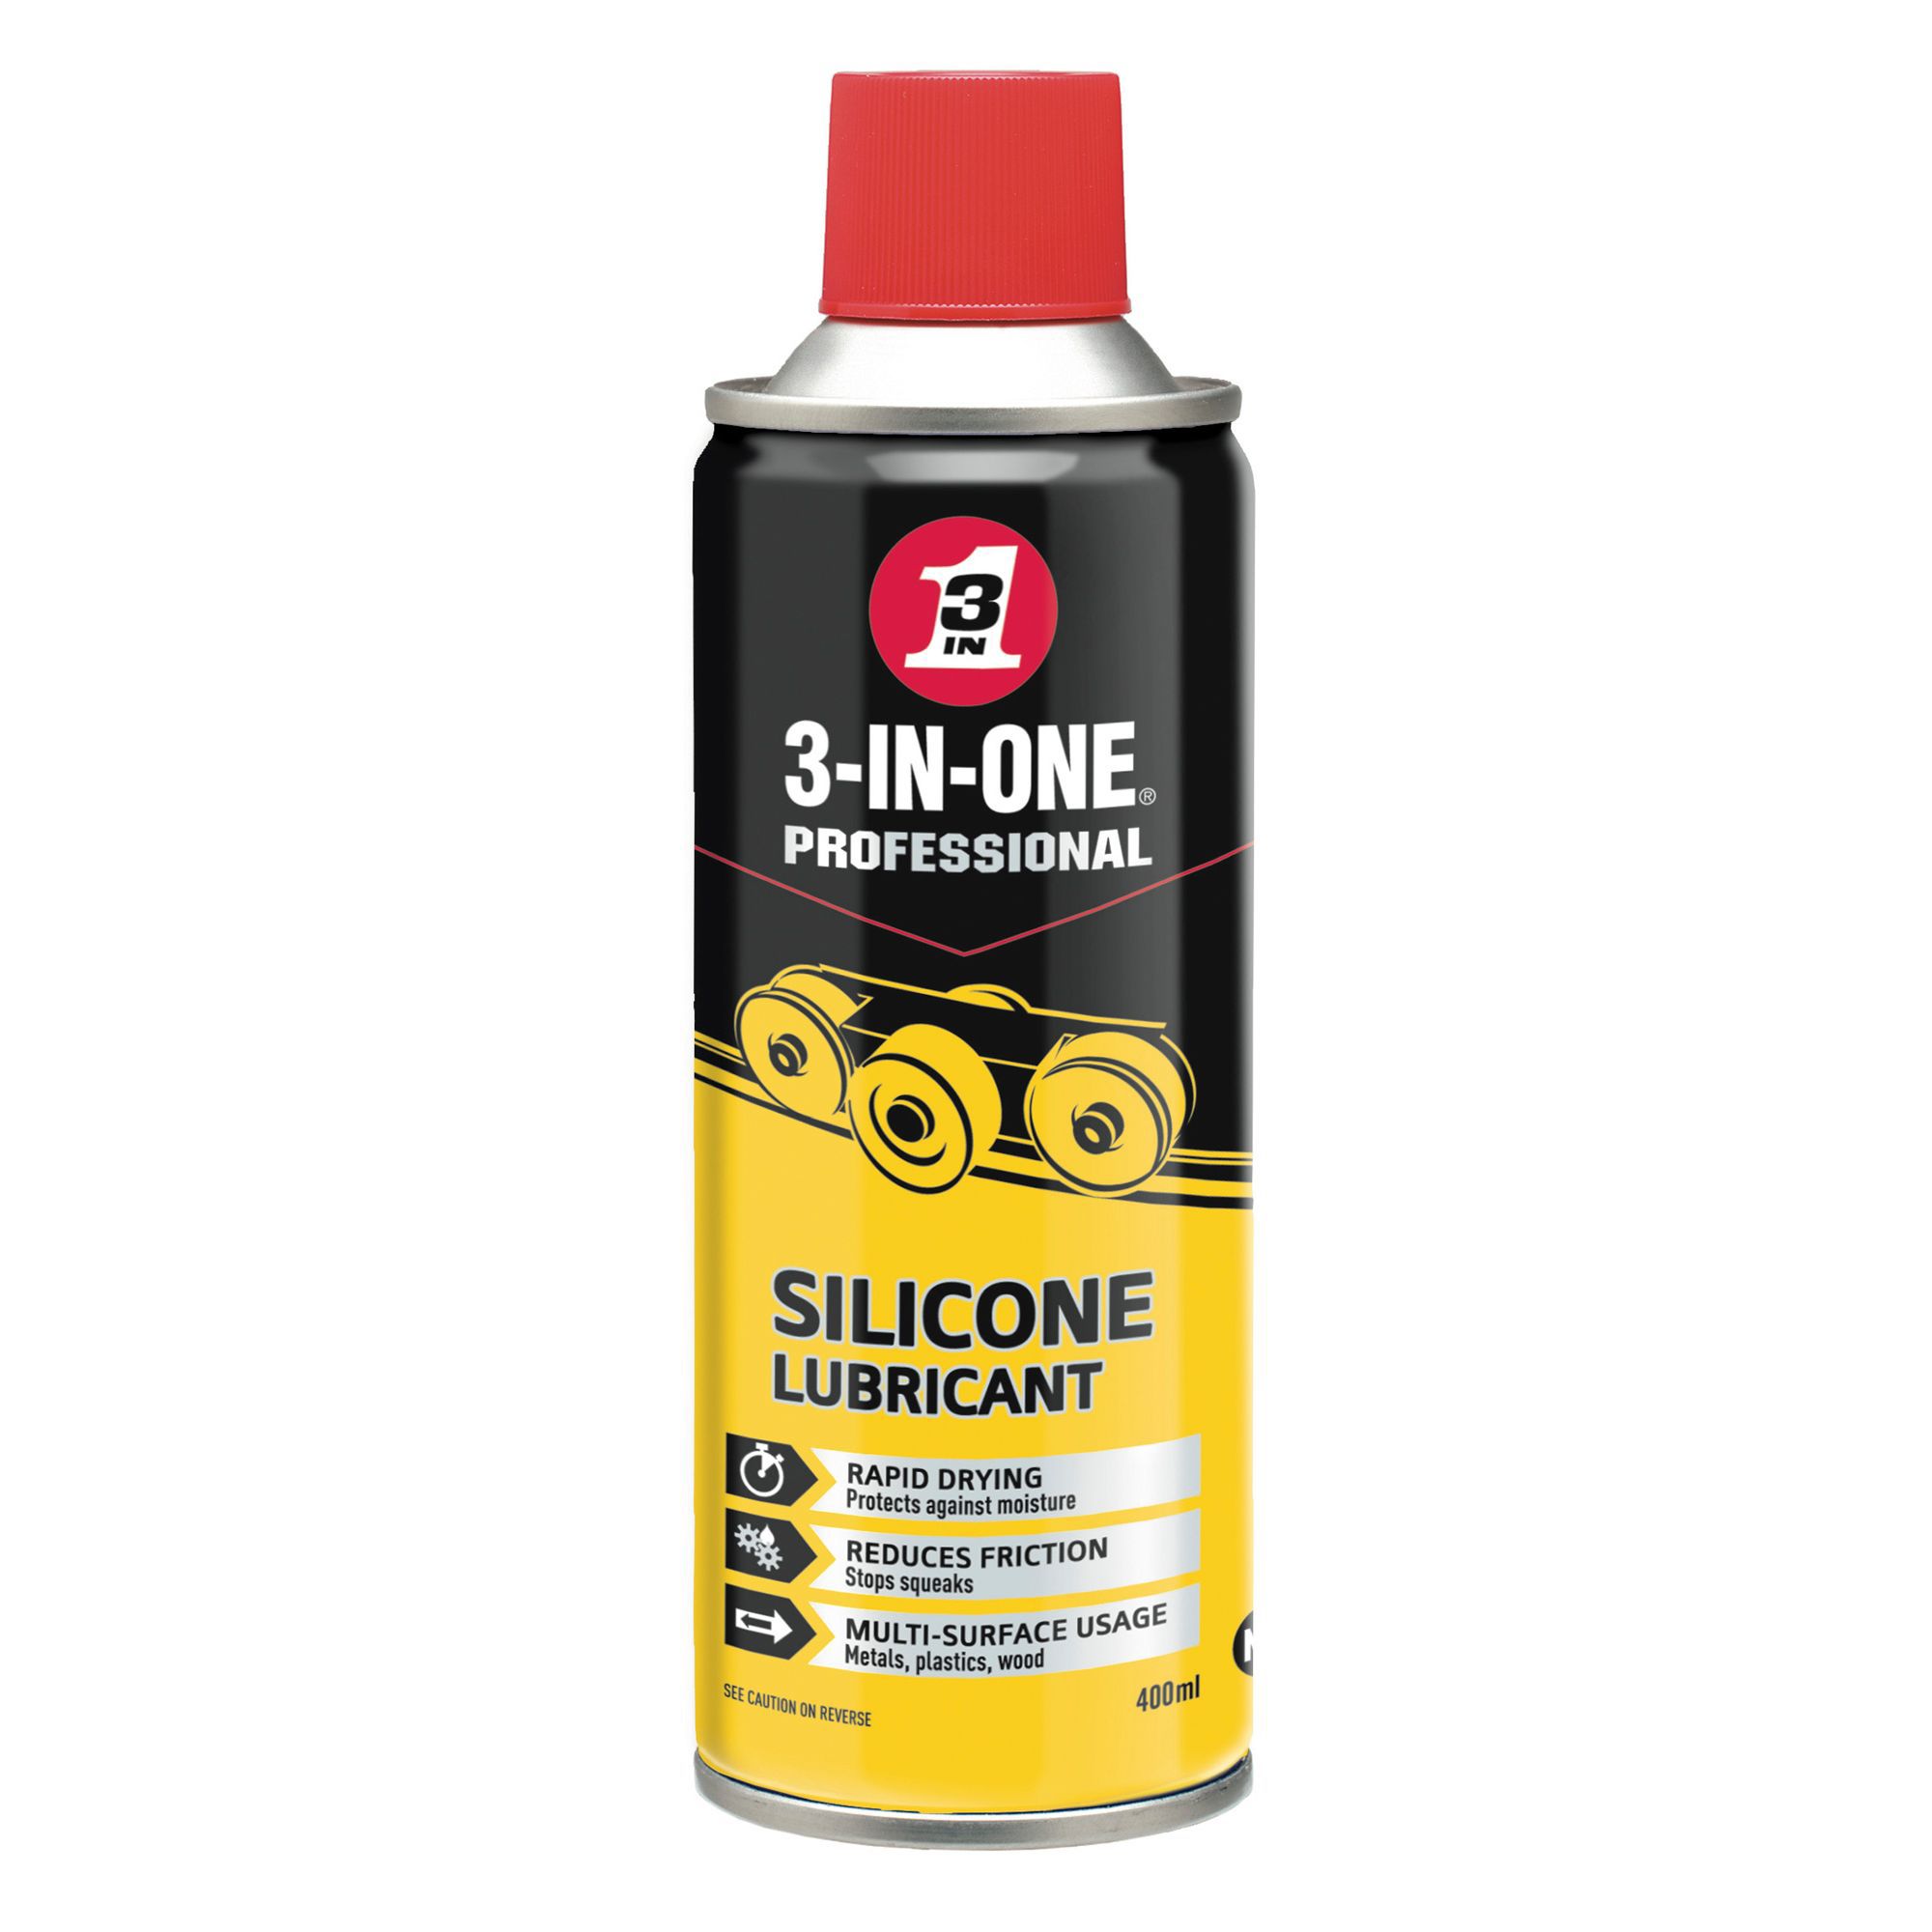 https://media.diy.com/is/image/Kingfisher/3-in-1-silicone-lubricant-400ml~5032227440159_02c?$MOB_PREV$&$width=768&$height=768